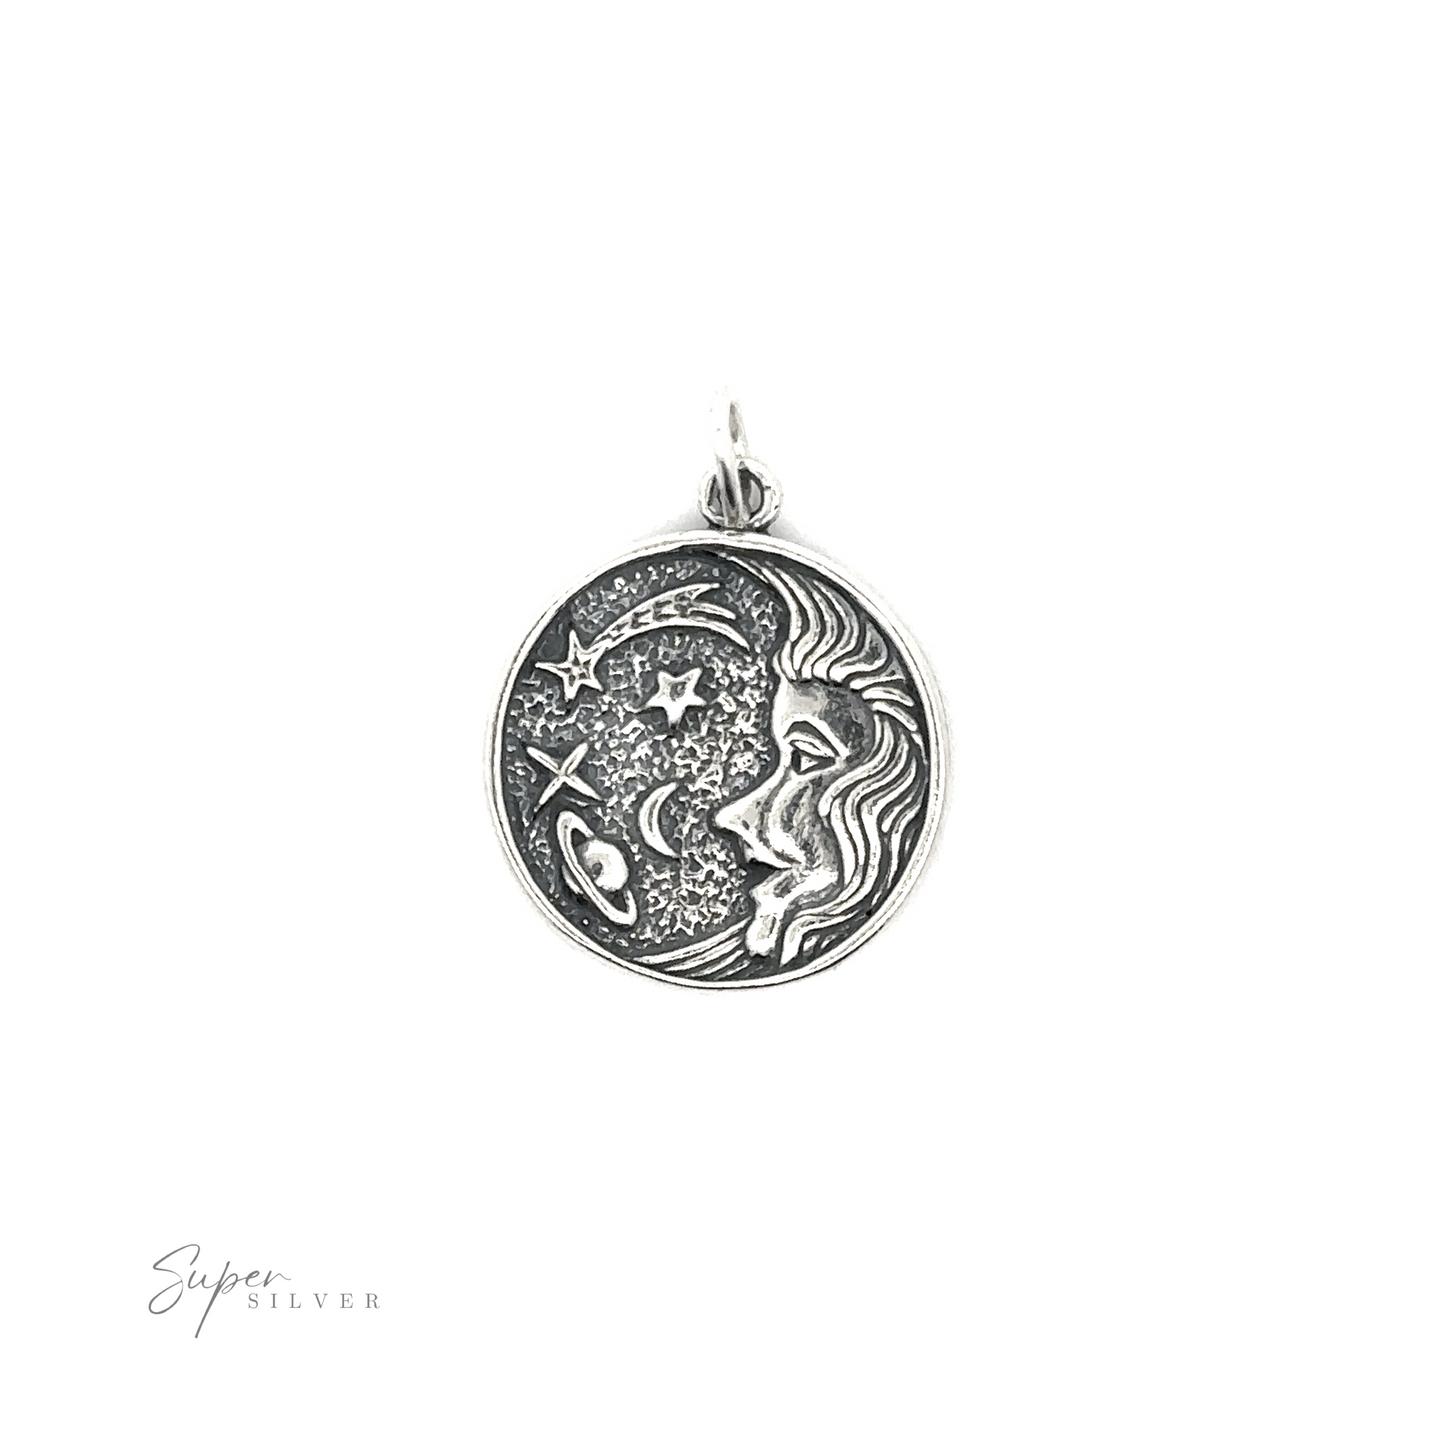 A Cosmic Medallion pendant with a silver moon and stars, exuding cosmic bliss.